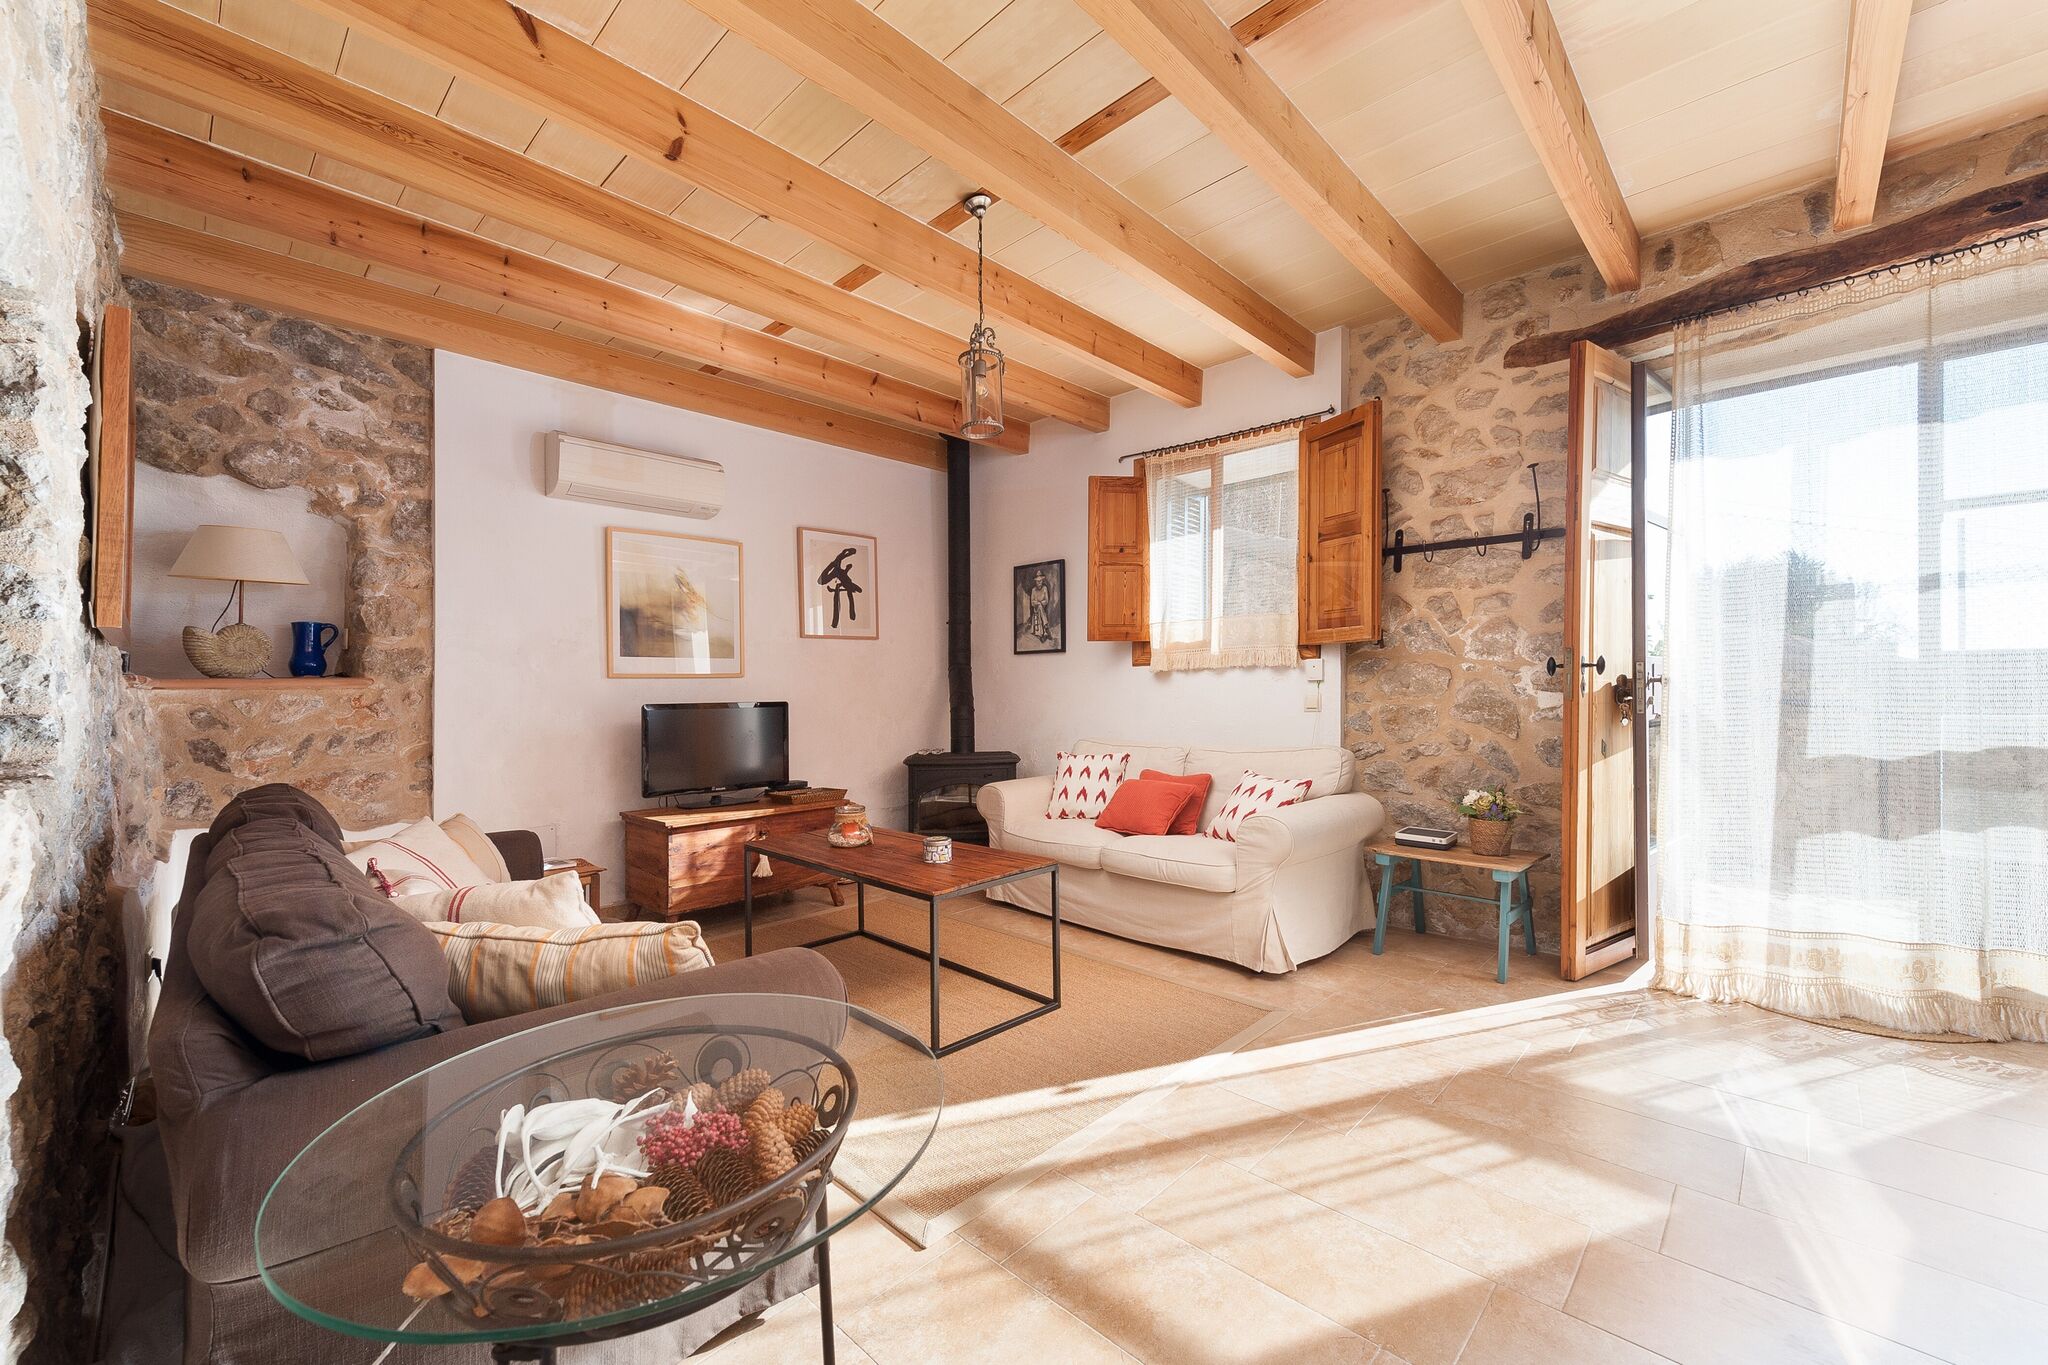 CAL TIO - Chalet for 8 people in CAIMARI.